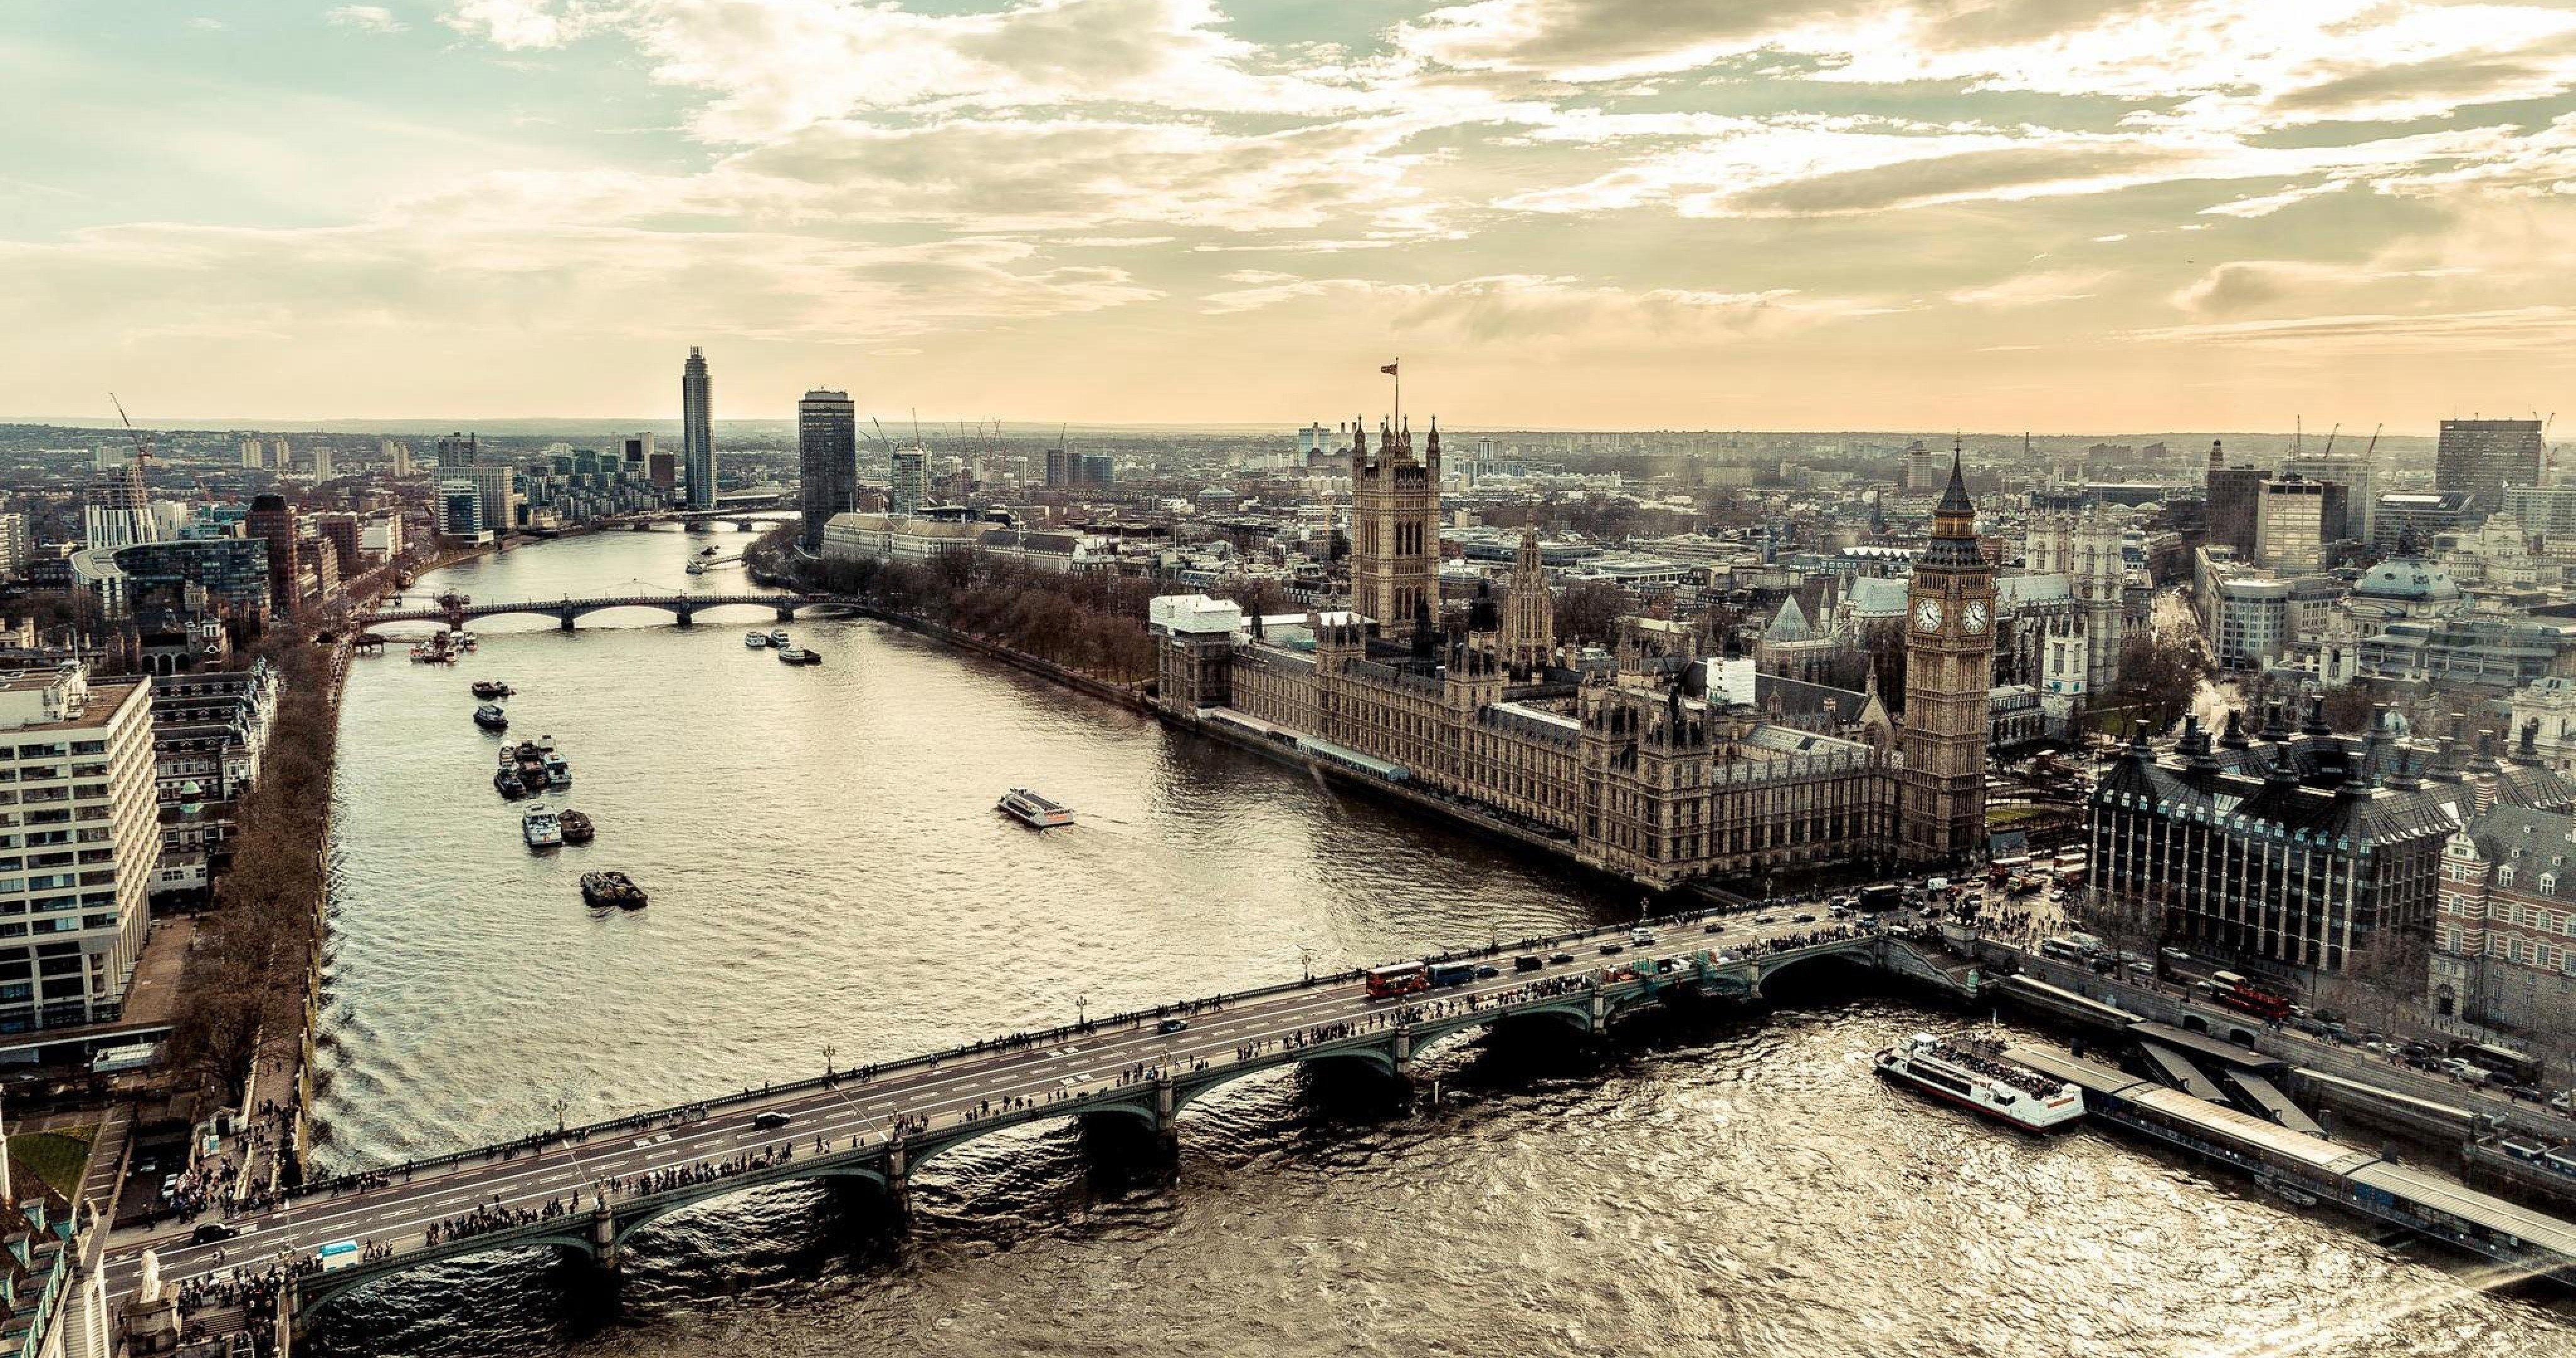 London View From Above 4k Ultra HD Wallpaper River